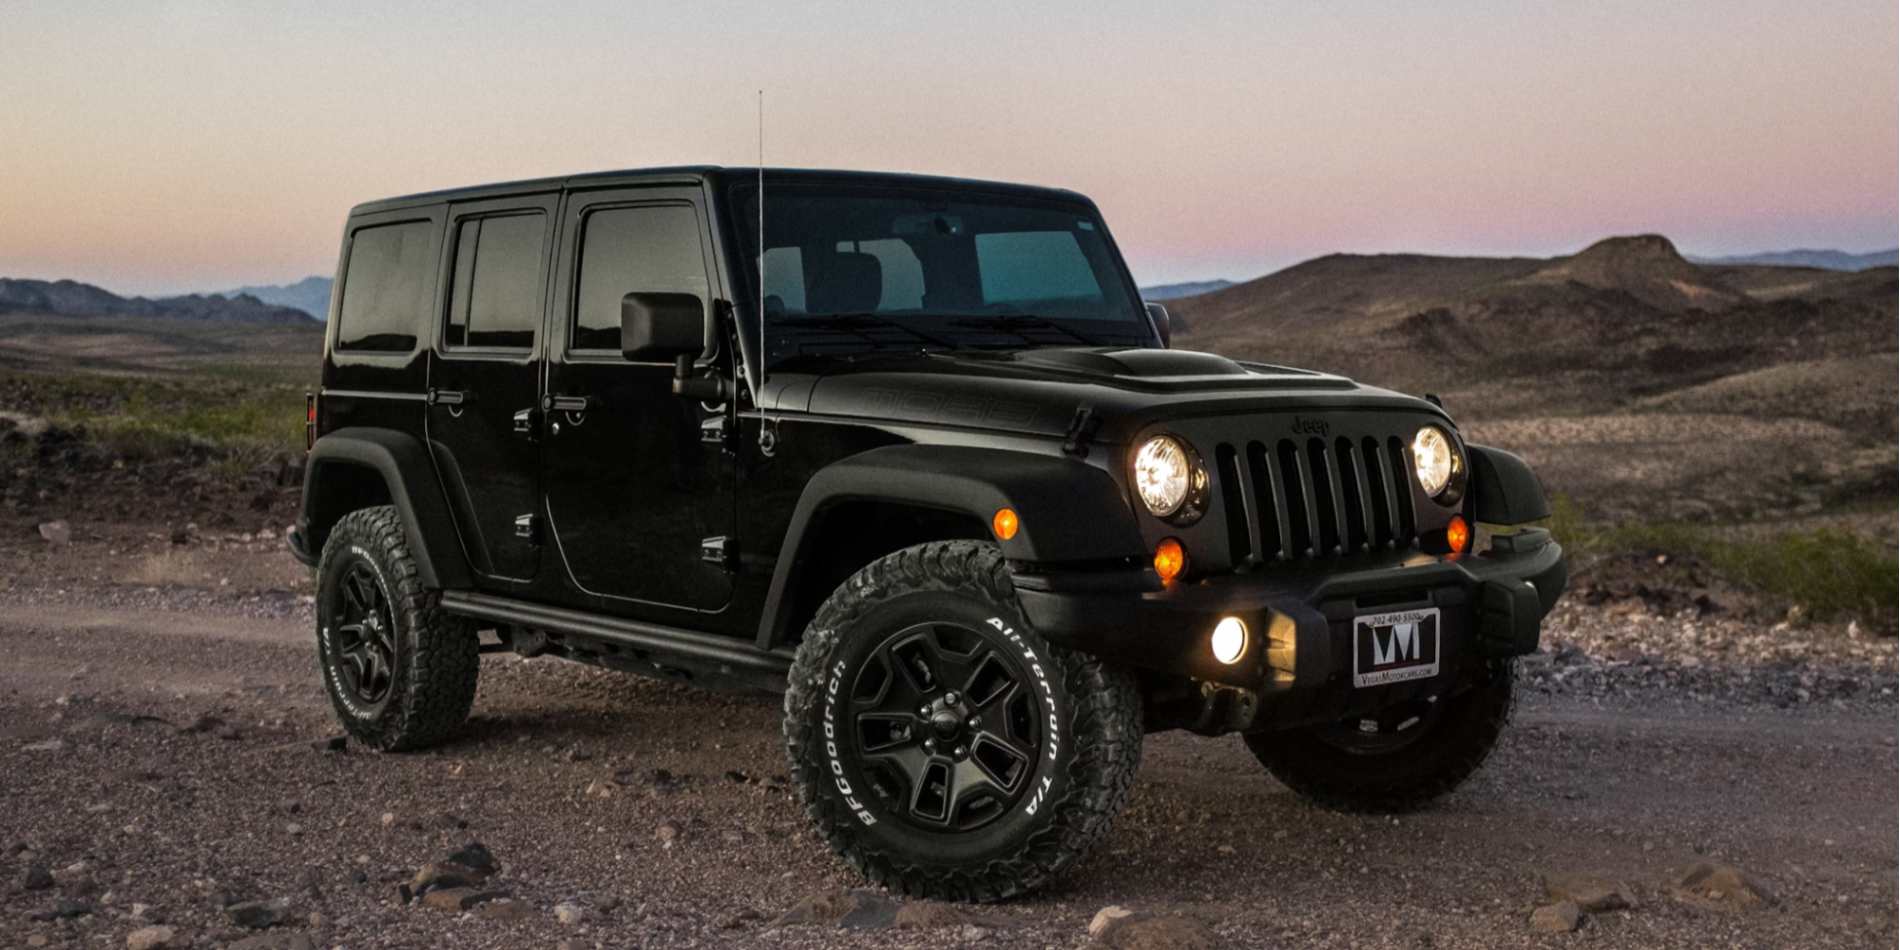 A black Jeep Wrangler parked on the road